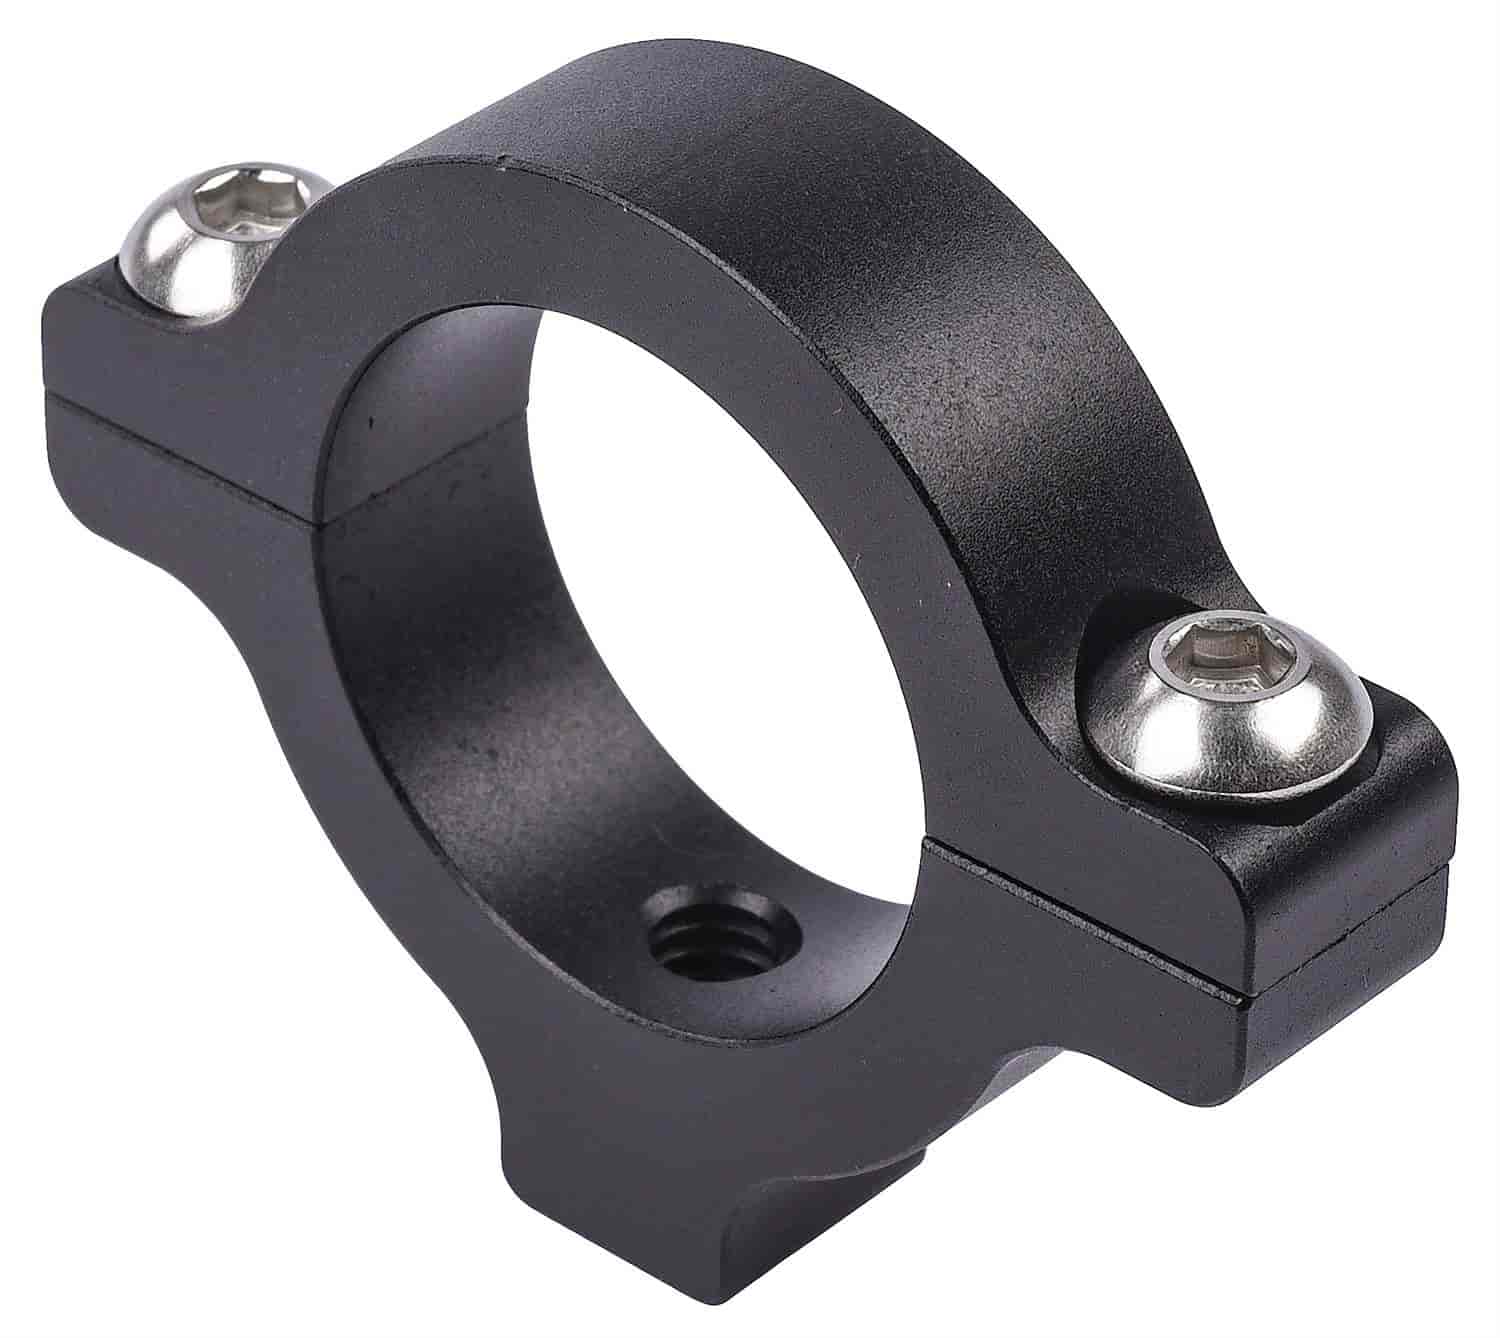 Roll Bar Accessory Clamp For 1.250 in. O.D. Tubing